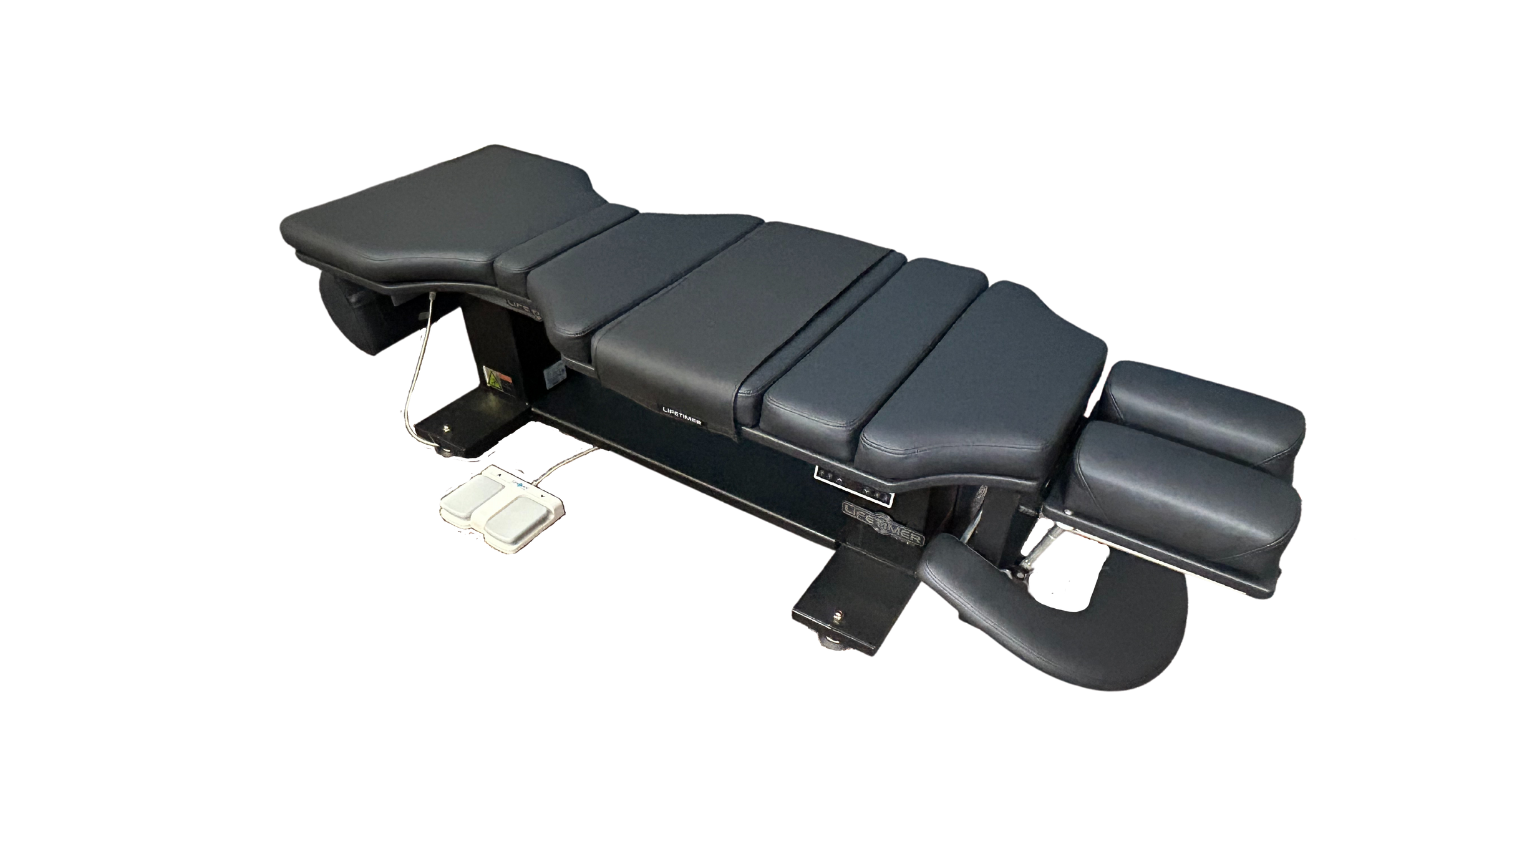 Lifetimer International LT-ME3 2.0 Black Chiropractic Elevation Table with white foot pedal and table grip cover and optional half-round bolster